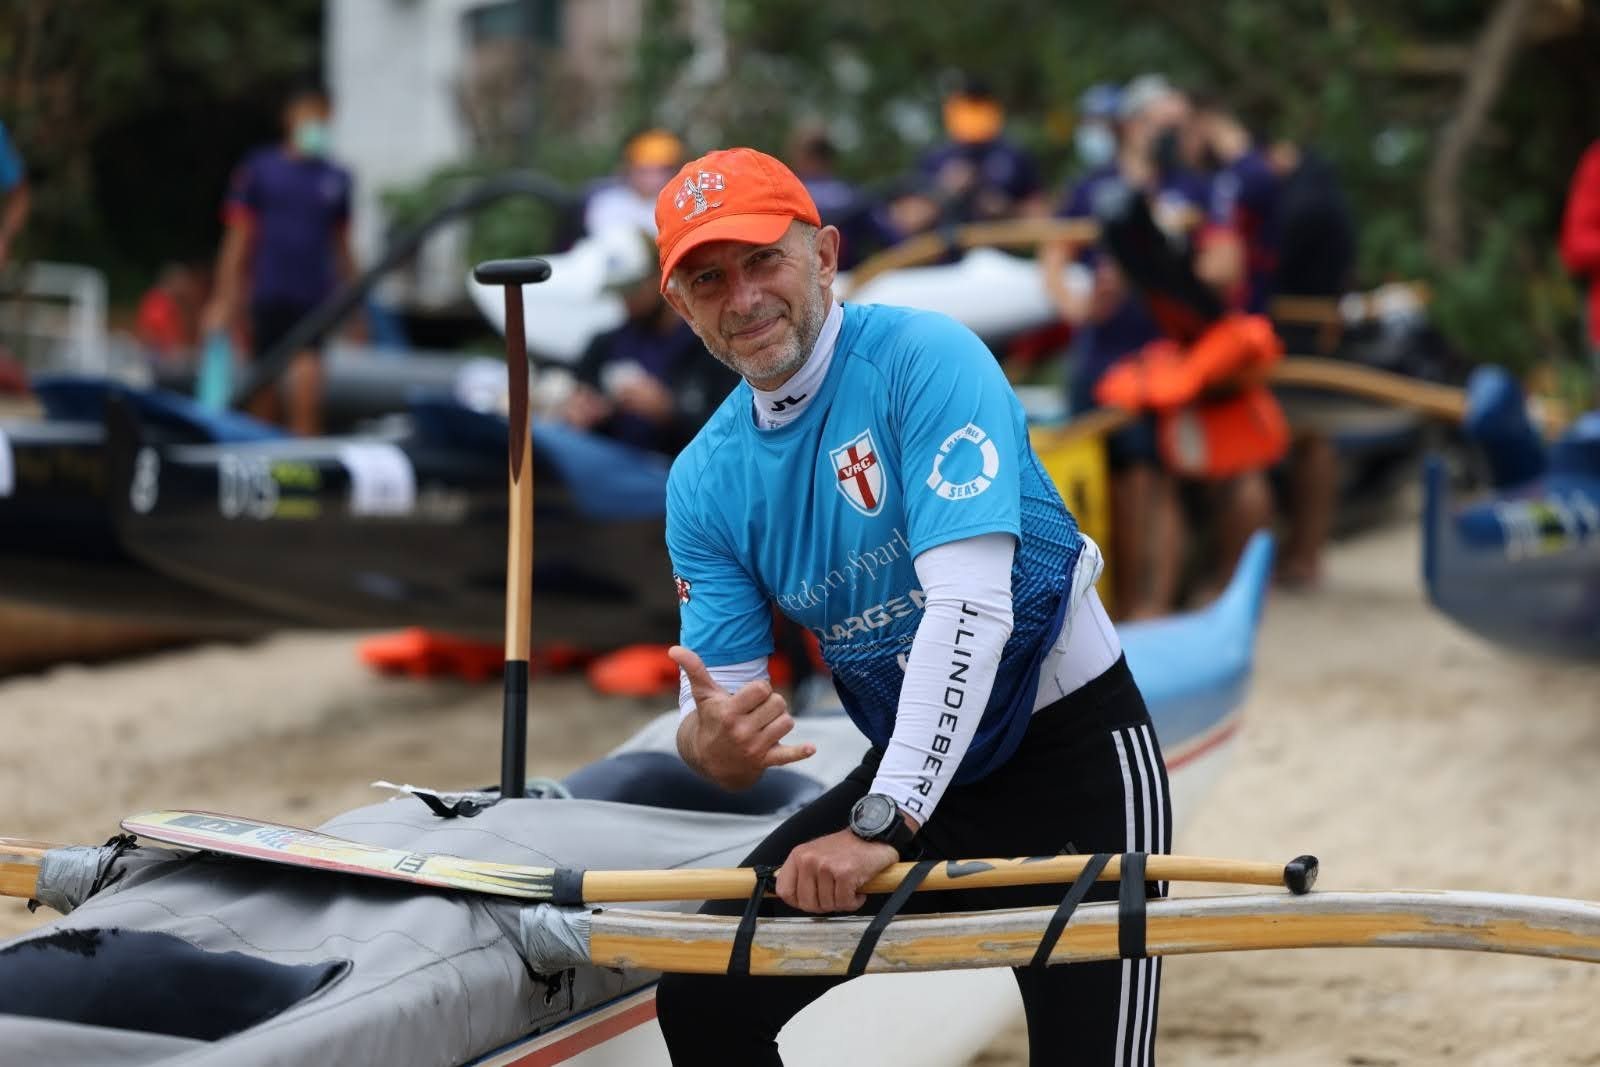 Vicente Di Clemente is part of a wave of people who are staying fit well into middle age. Photo: Handout